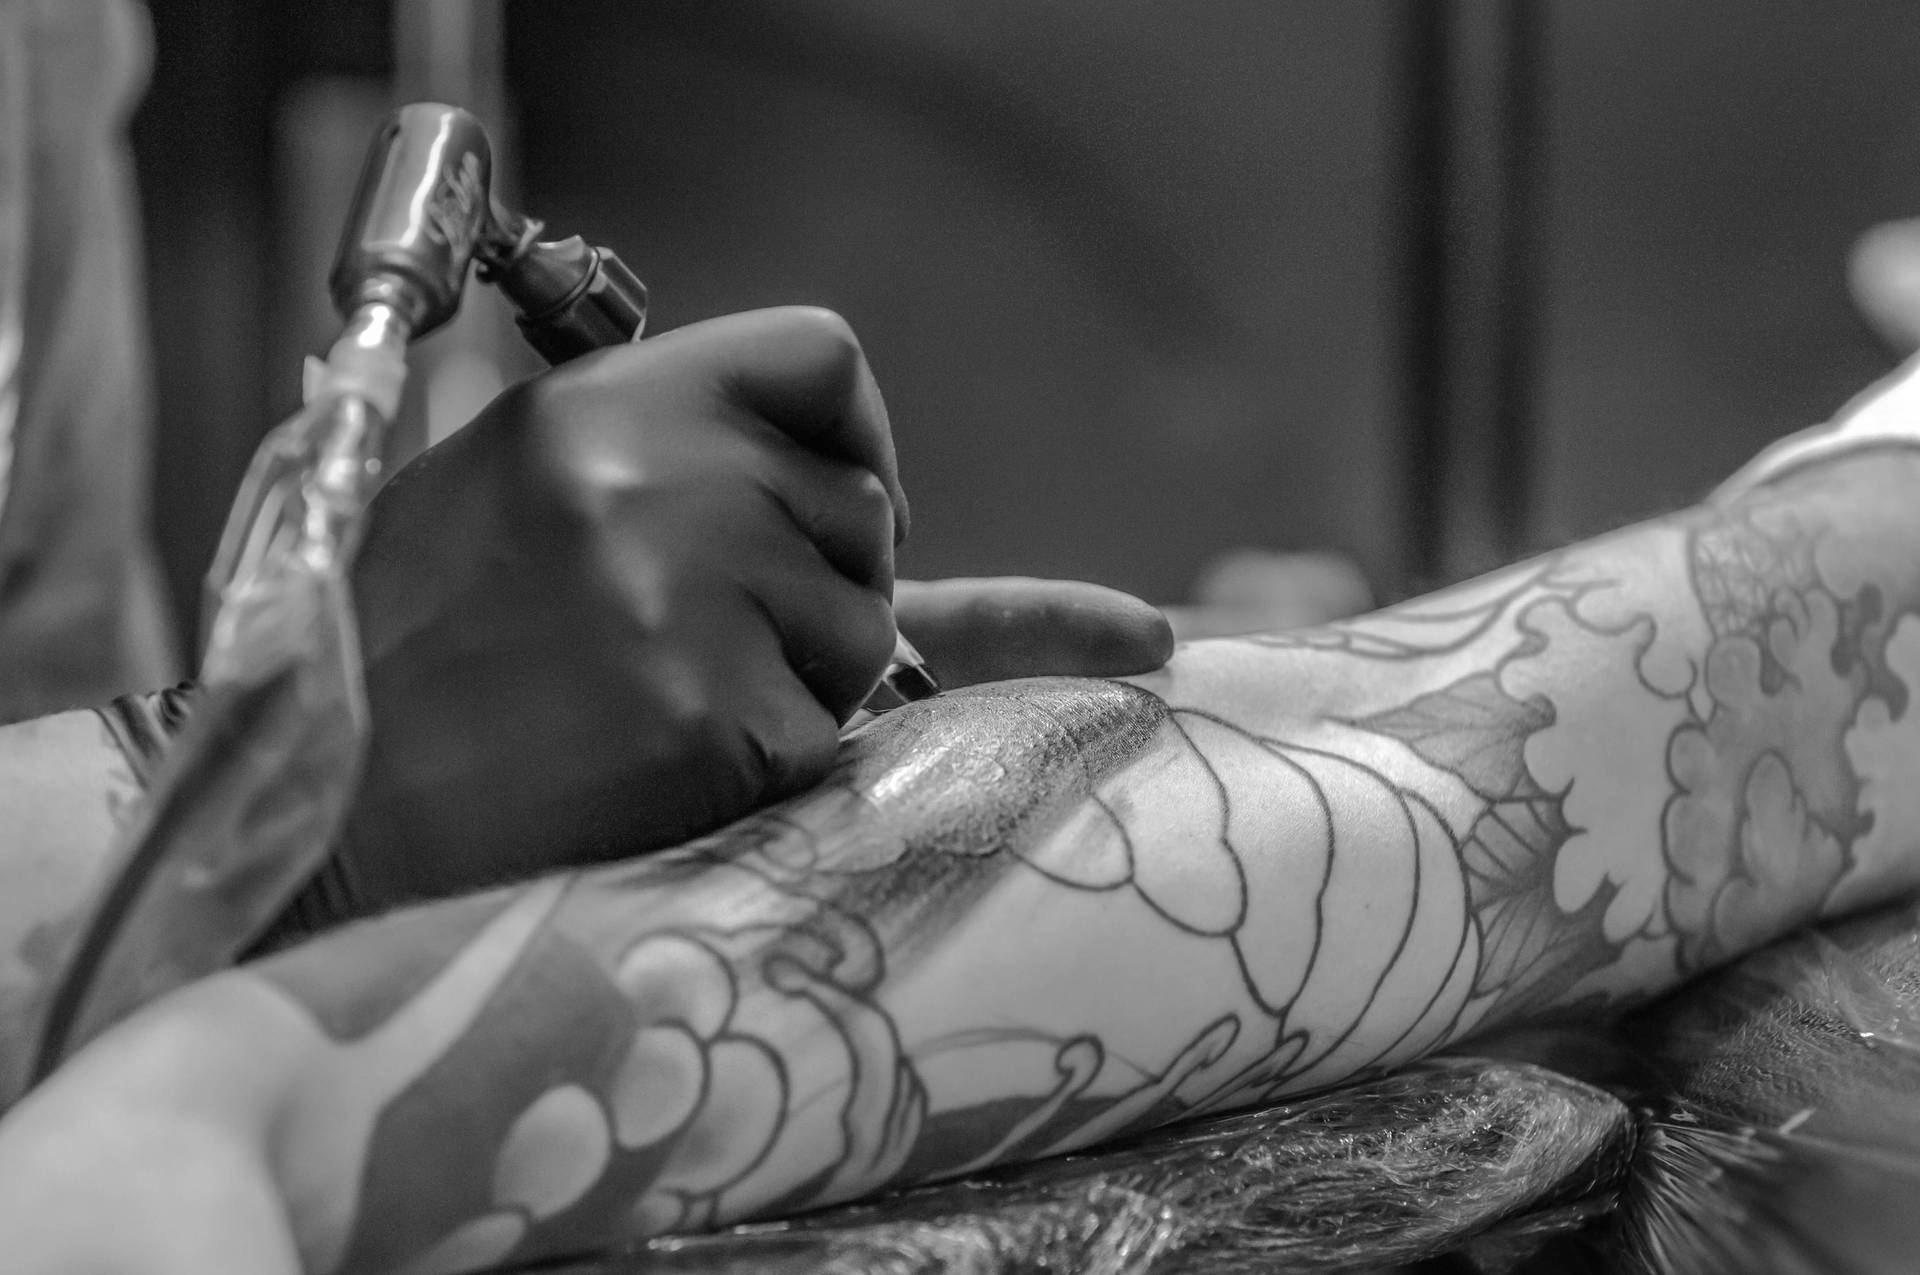 Intricate Artistry Behind The Monochrome Hd Tattoo Process